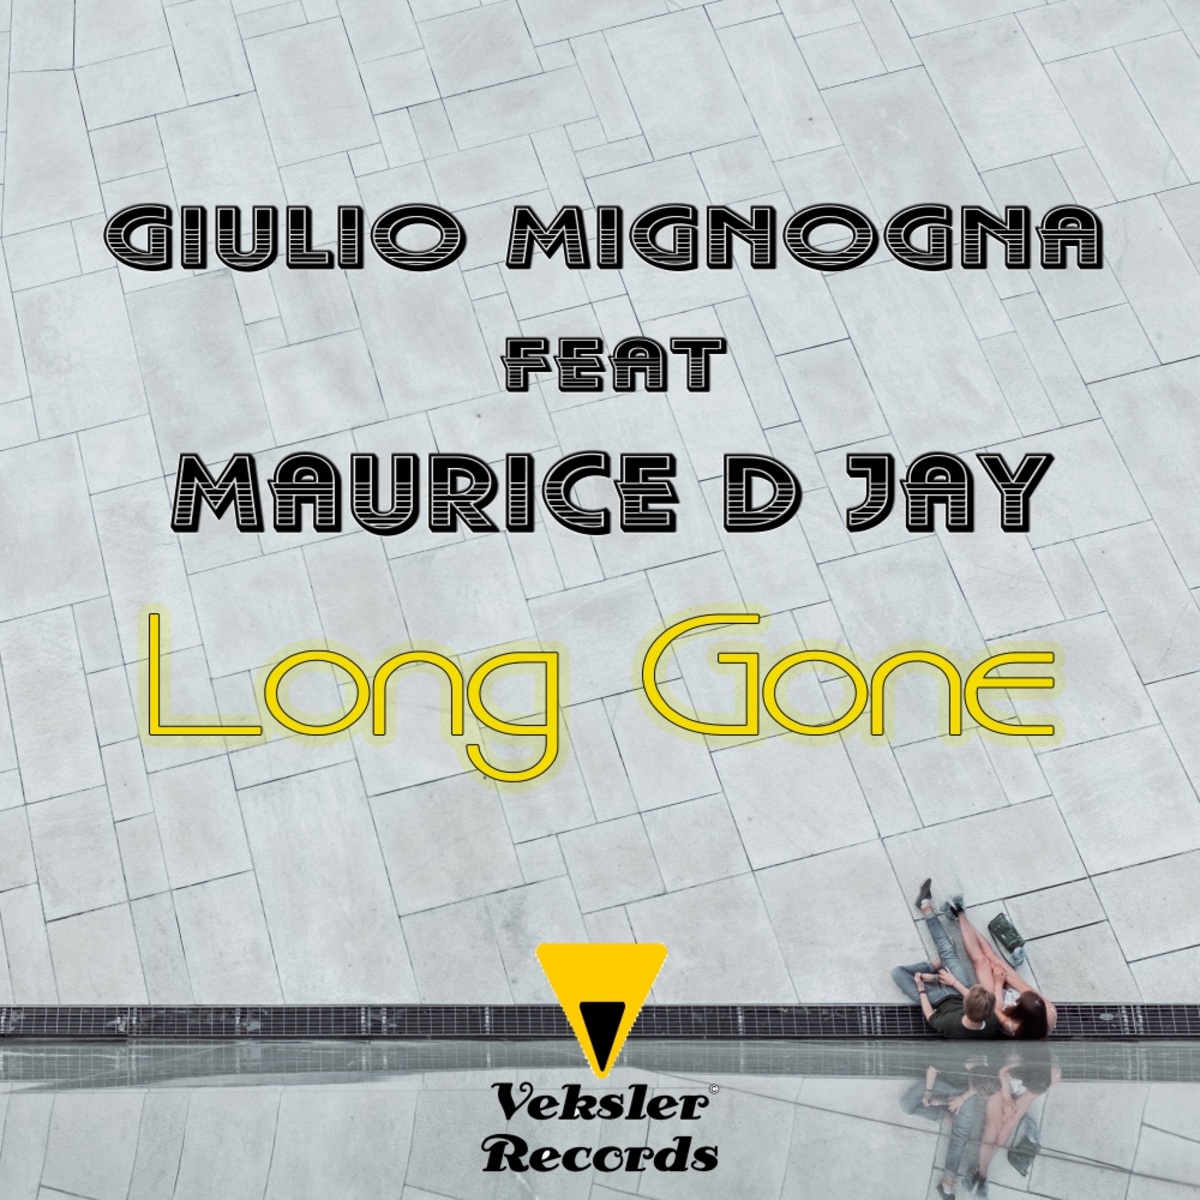 Giulio Mignogna ft Maurice D Jay - Long Gone / Veksler Records